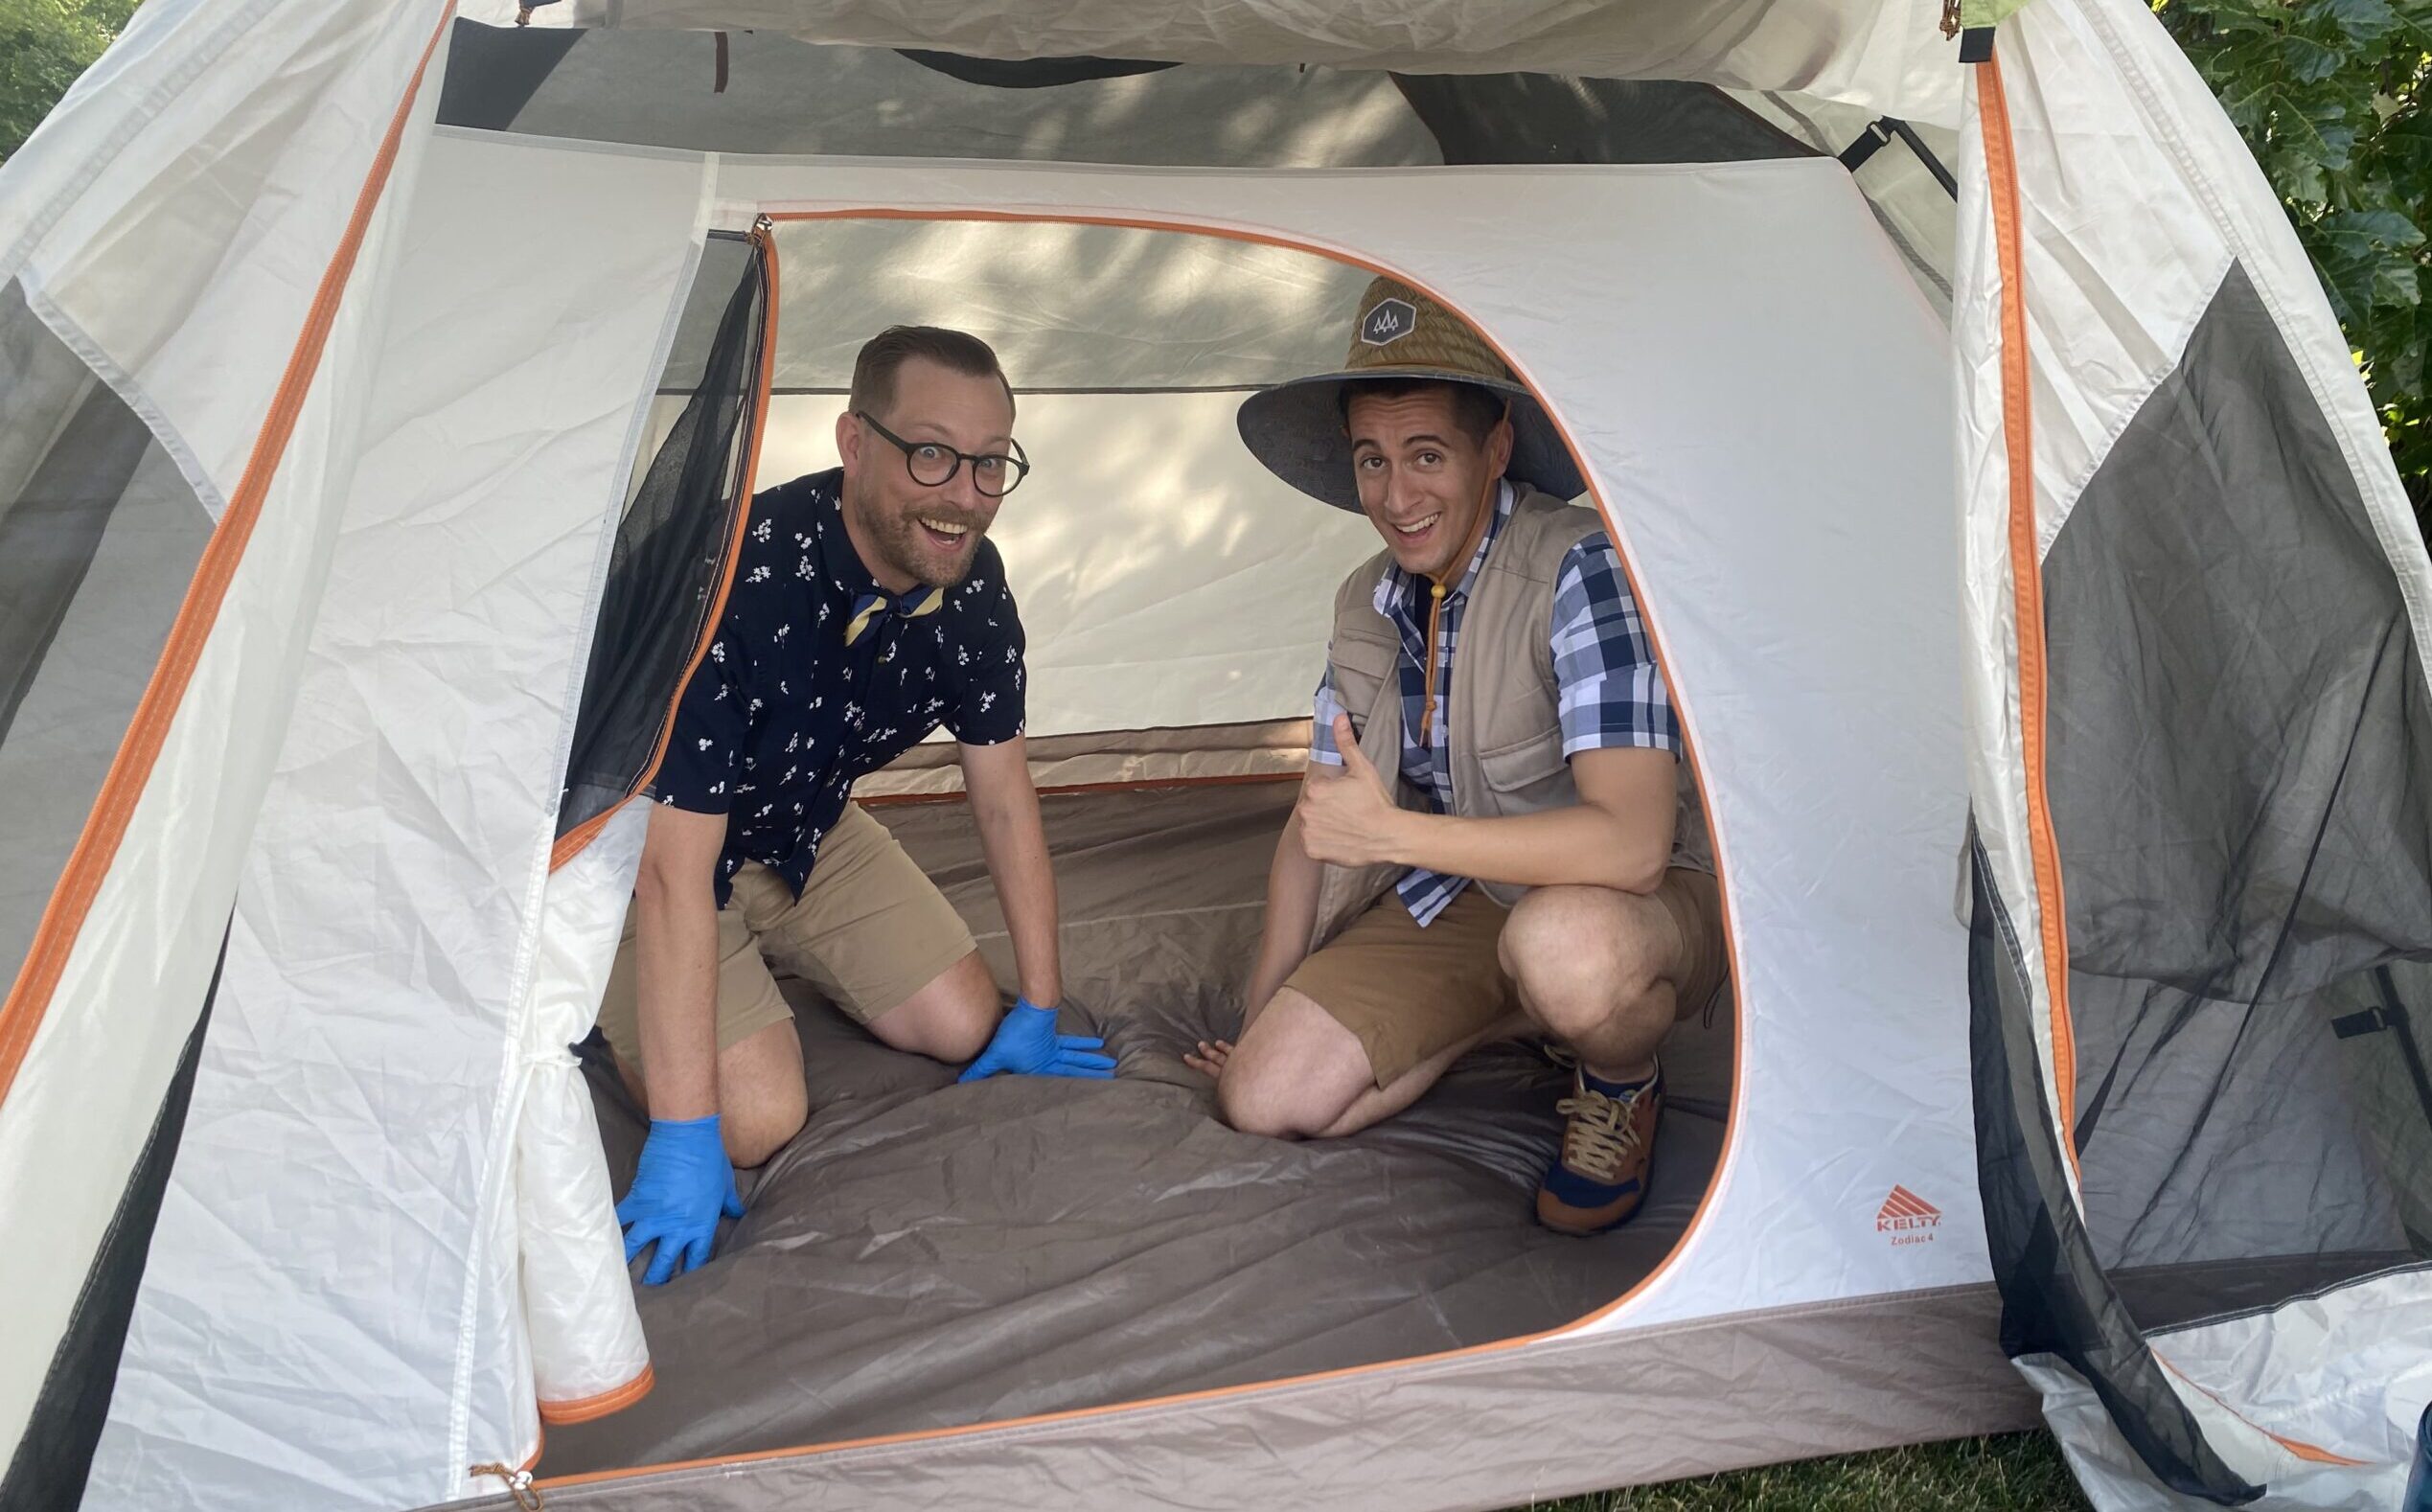 Two people in a tent smile out at the camera.